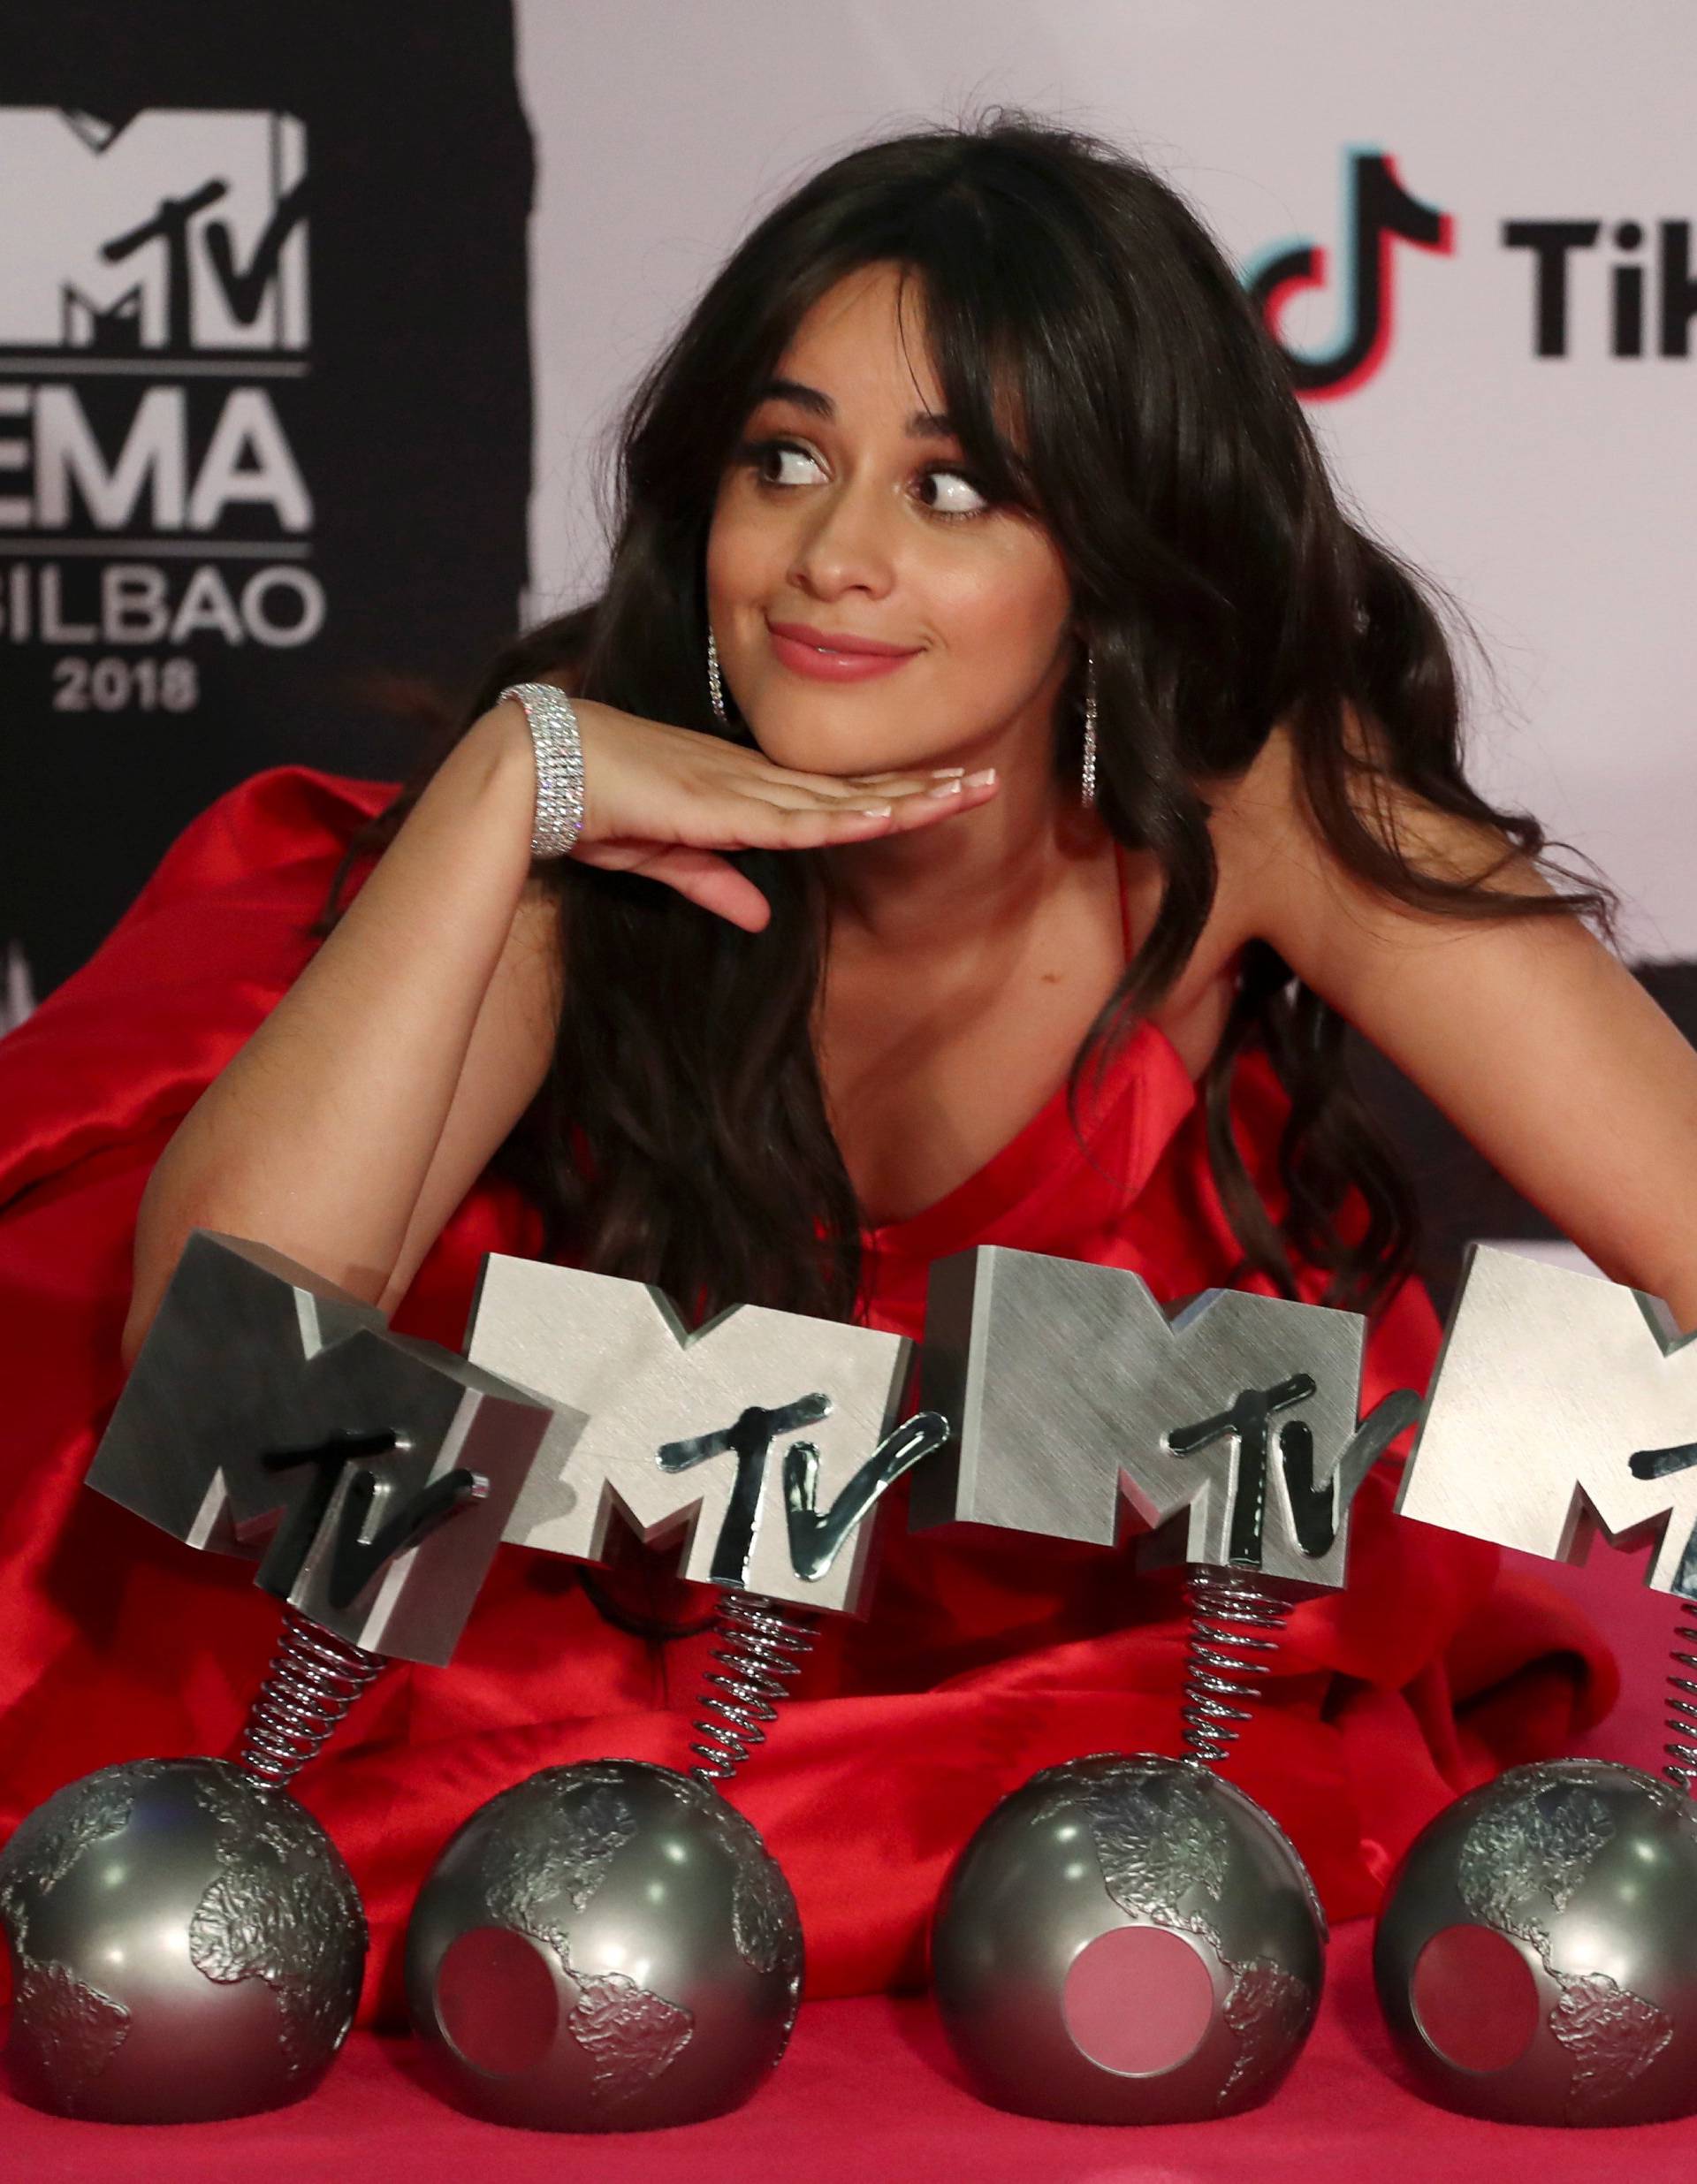 Camila Cabello poses with her awards during the 2018 MTV Europe Music Awards at Bilbao Exhibition Centre in Bilbao